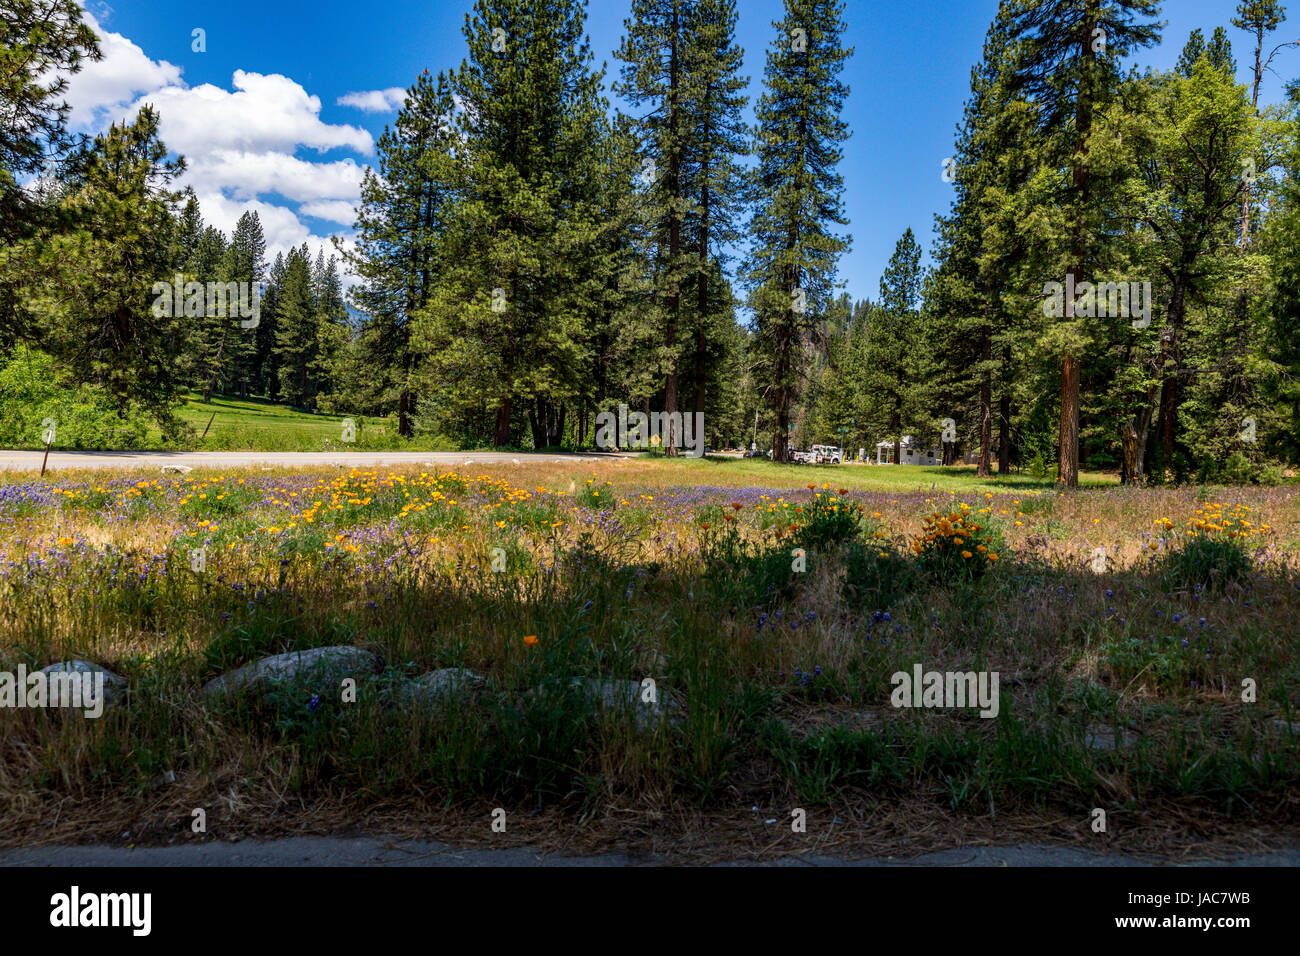 At Wawona in Yosemite National Park in California with wildflowers and Wawona golf course in the distance. Stock Photo